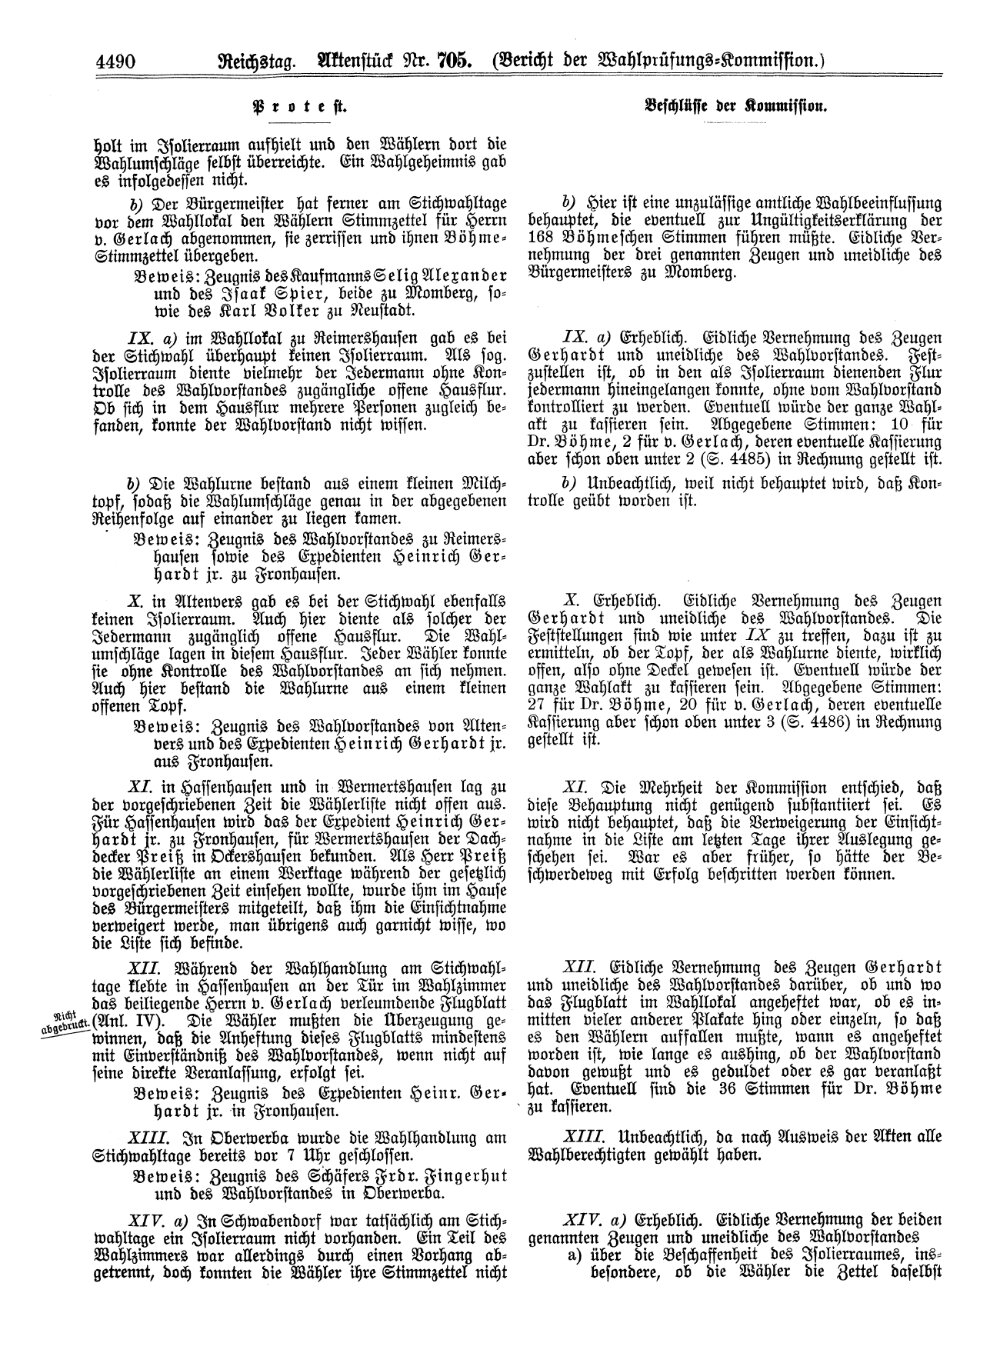 Scan of page 4490